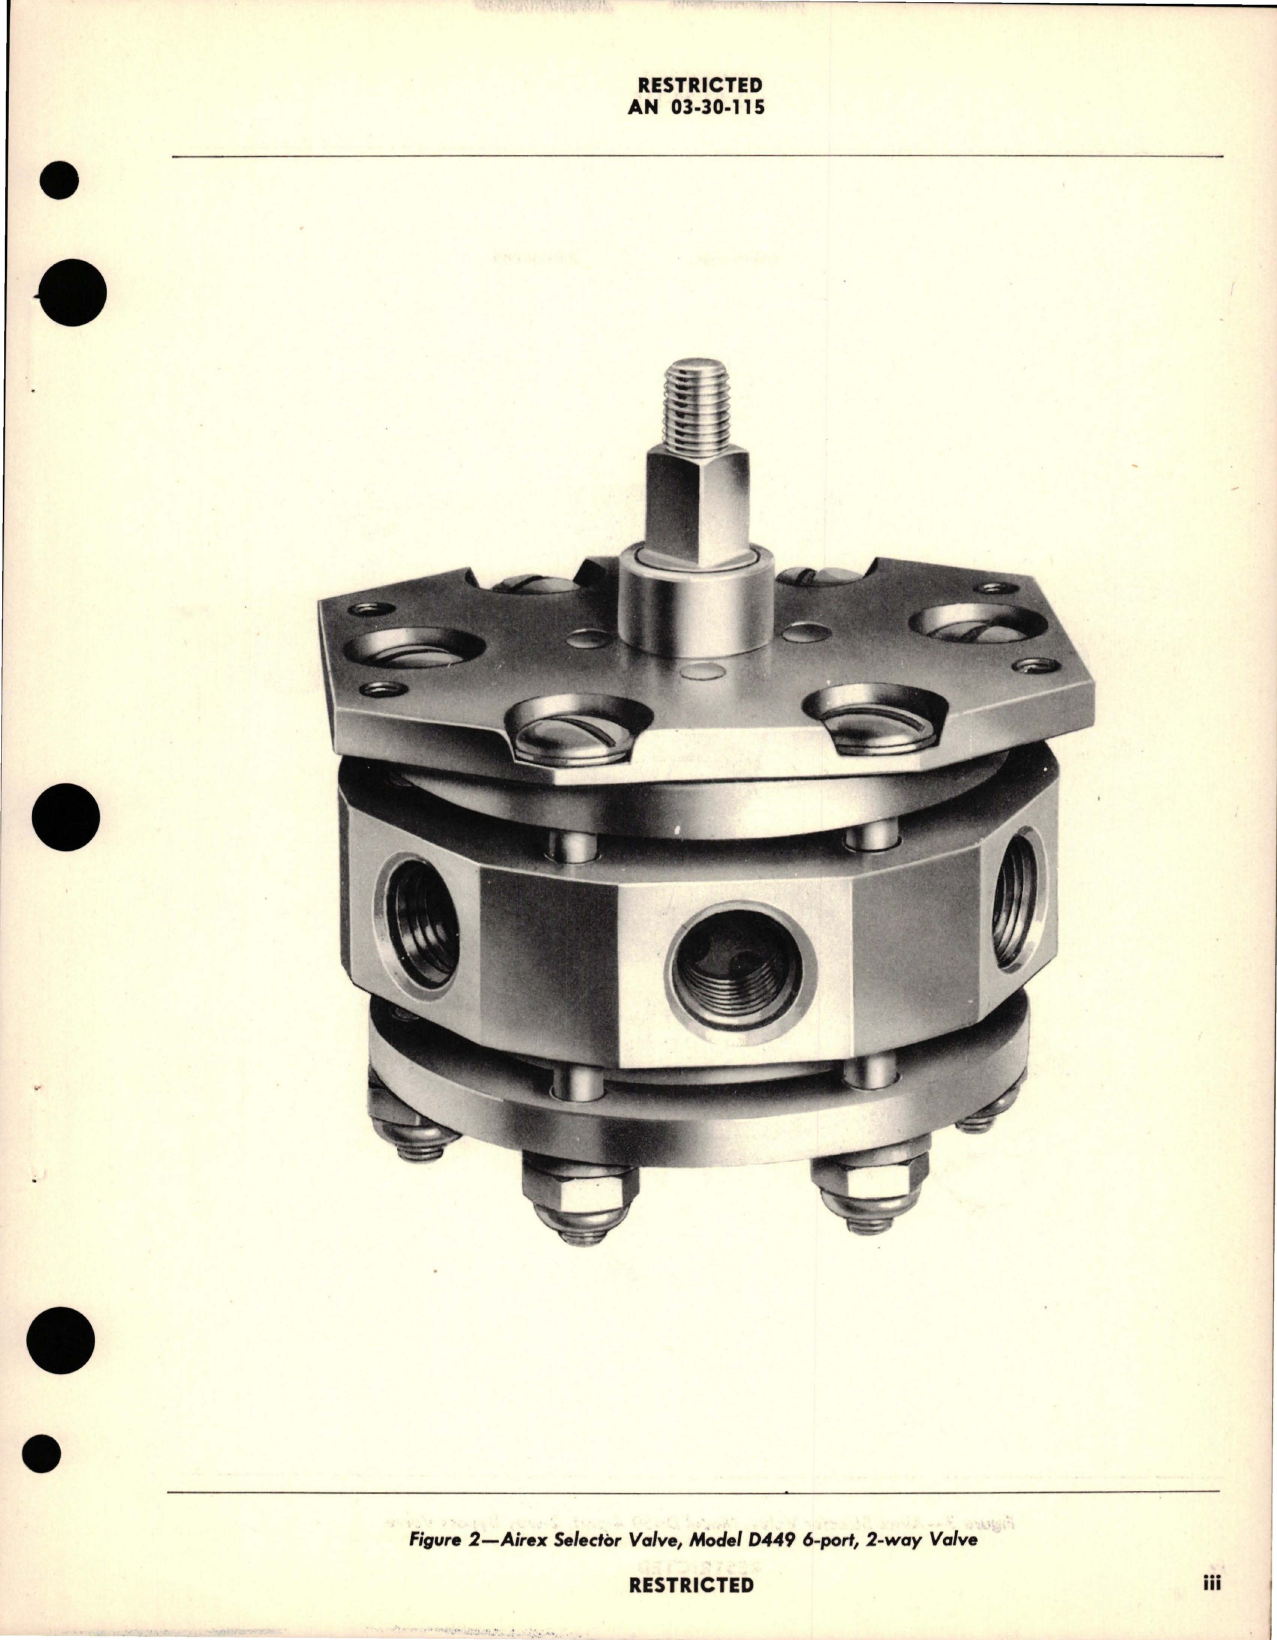 Sample page 5 from AirCorps Library document: Instructions with Parts Catalog for Hydraulic Selector Valves - Models D357, D449, and D450